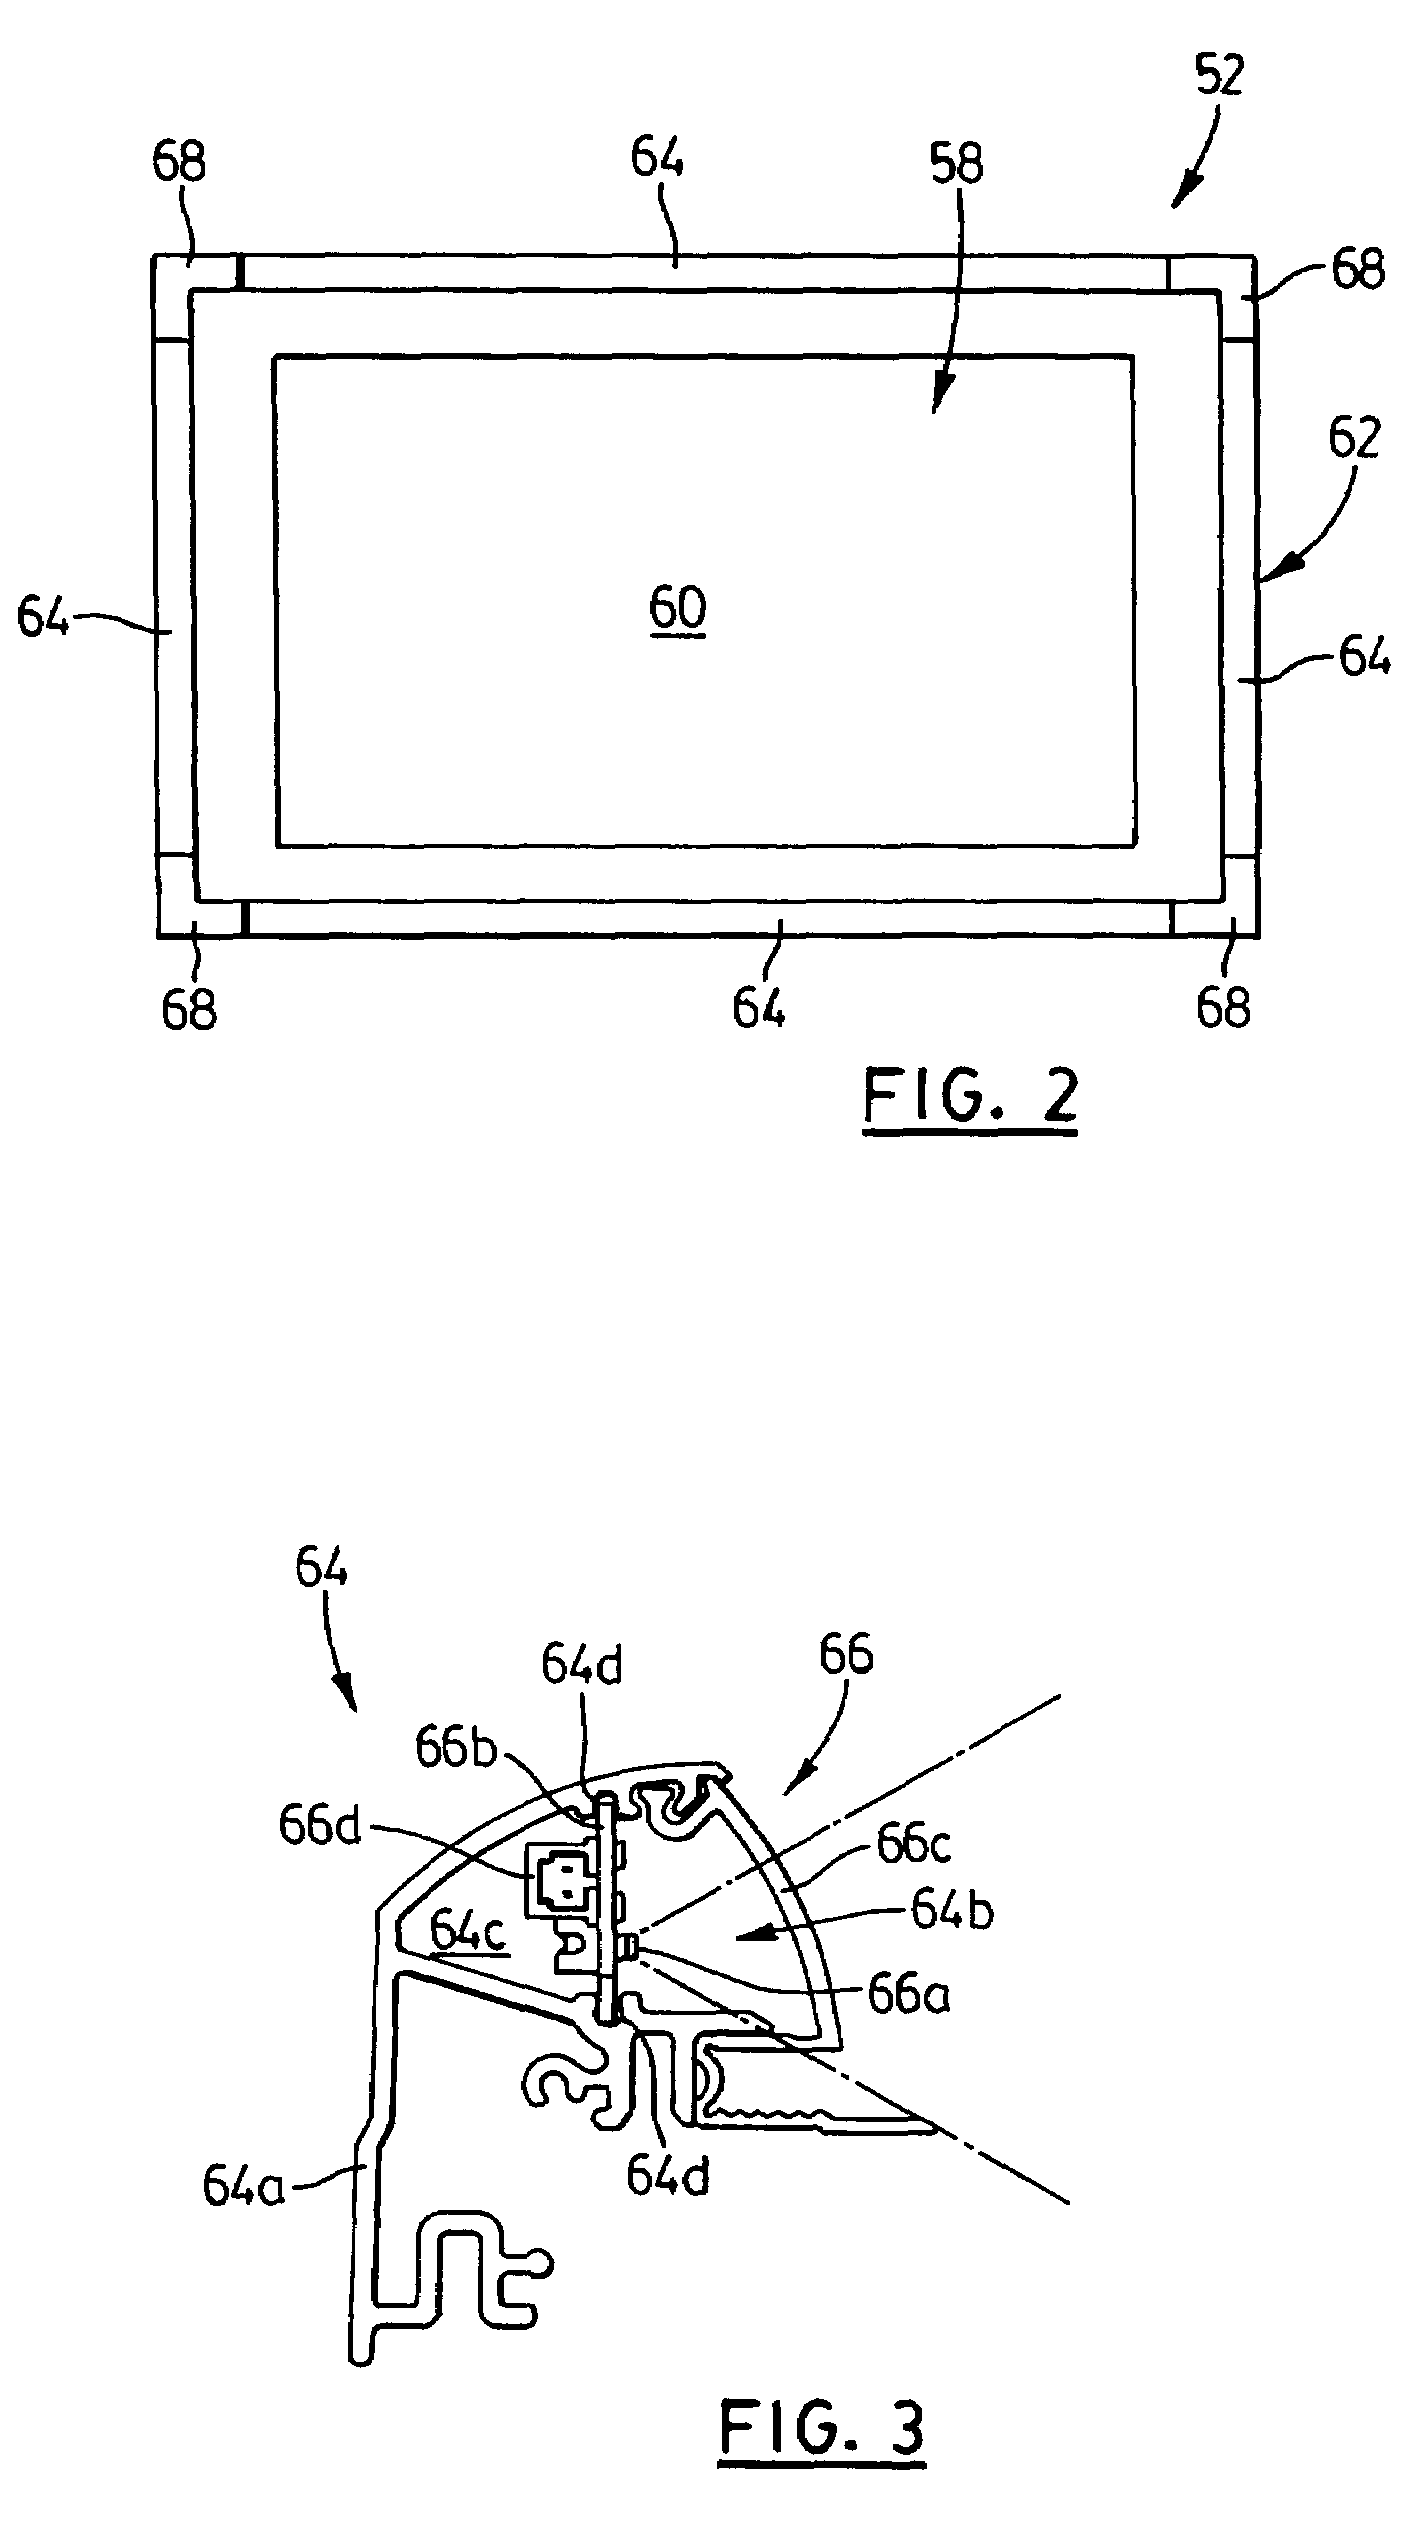 Illuminated bezel and touch system incorporating the same